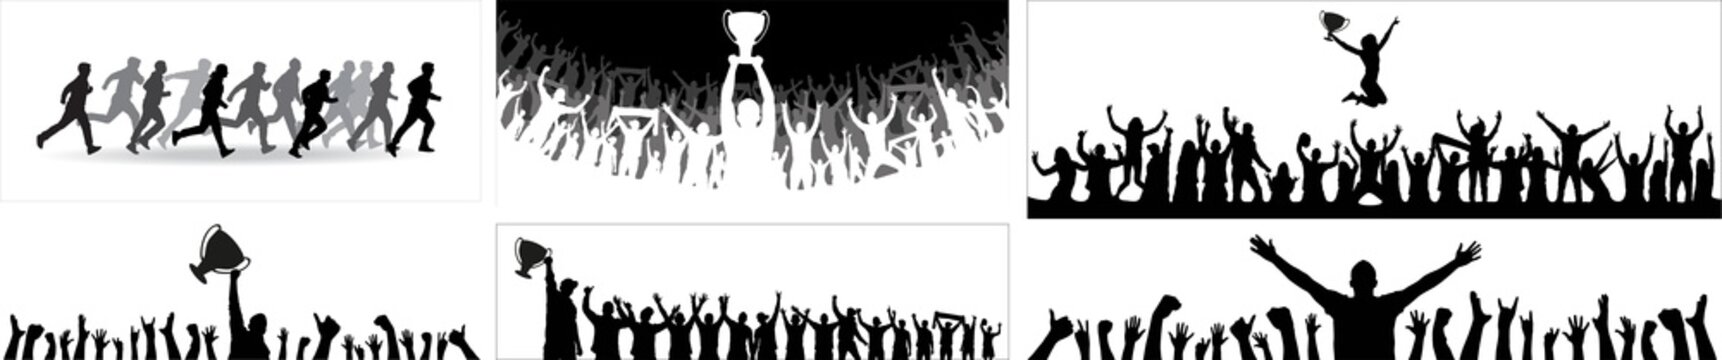 Champion cup european world and crowd many people entertain event playing and happy dancing from party in arena Vector illustration